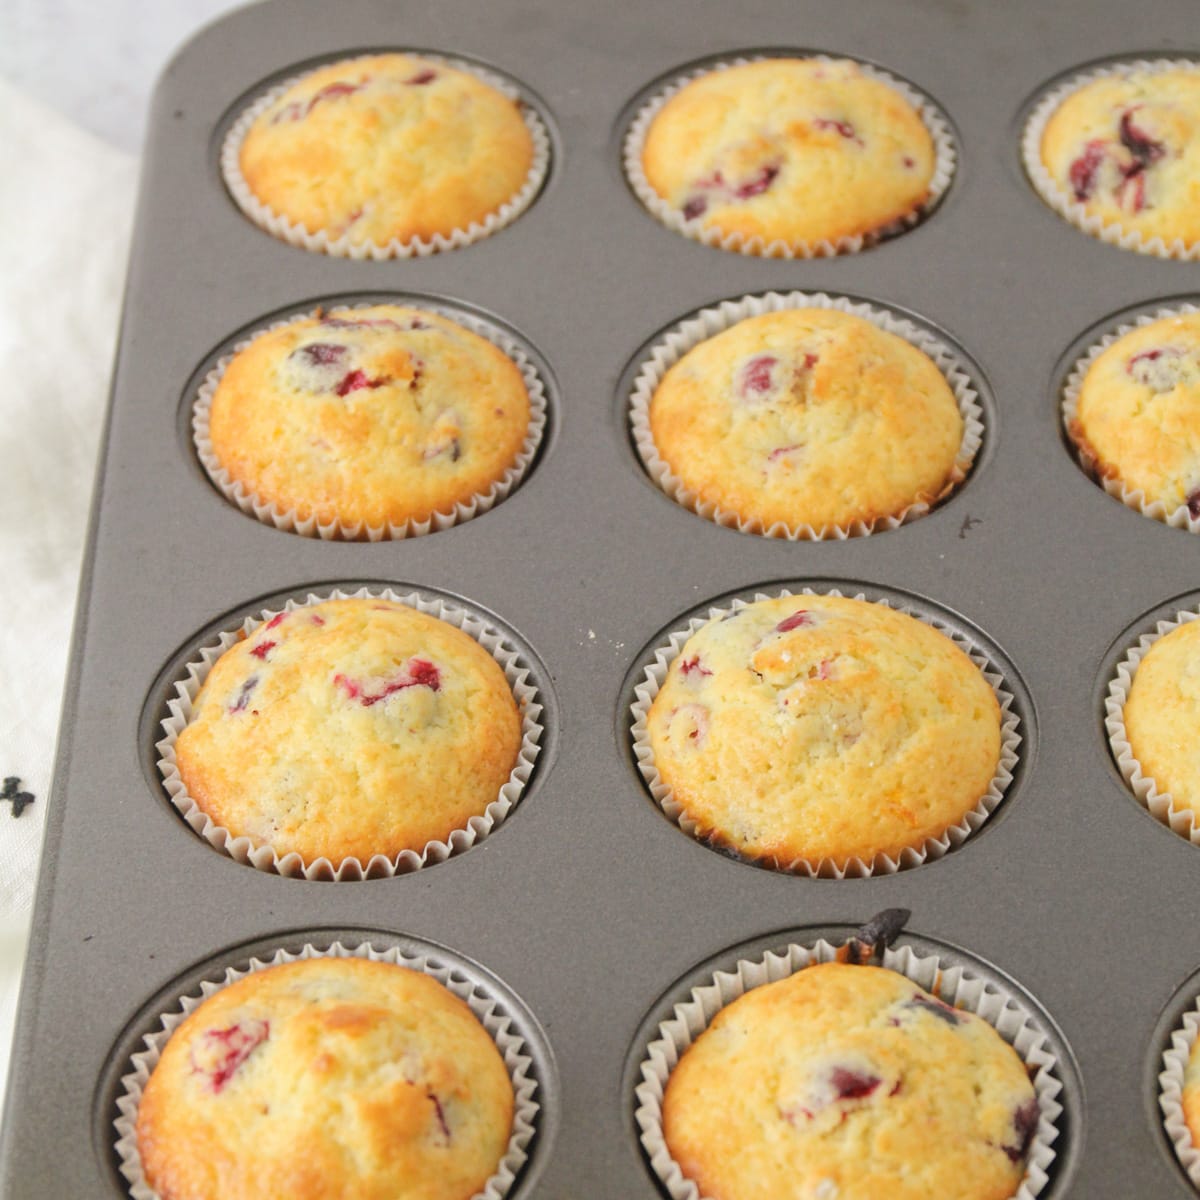 Baked muffins filled with cranberries and orange pieces in a tin.